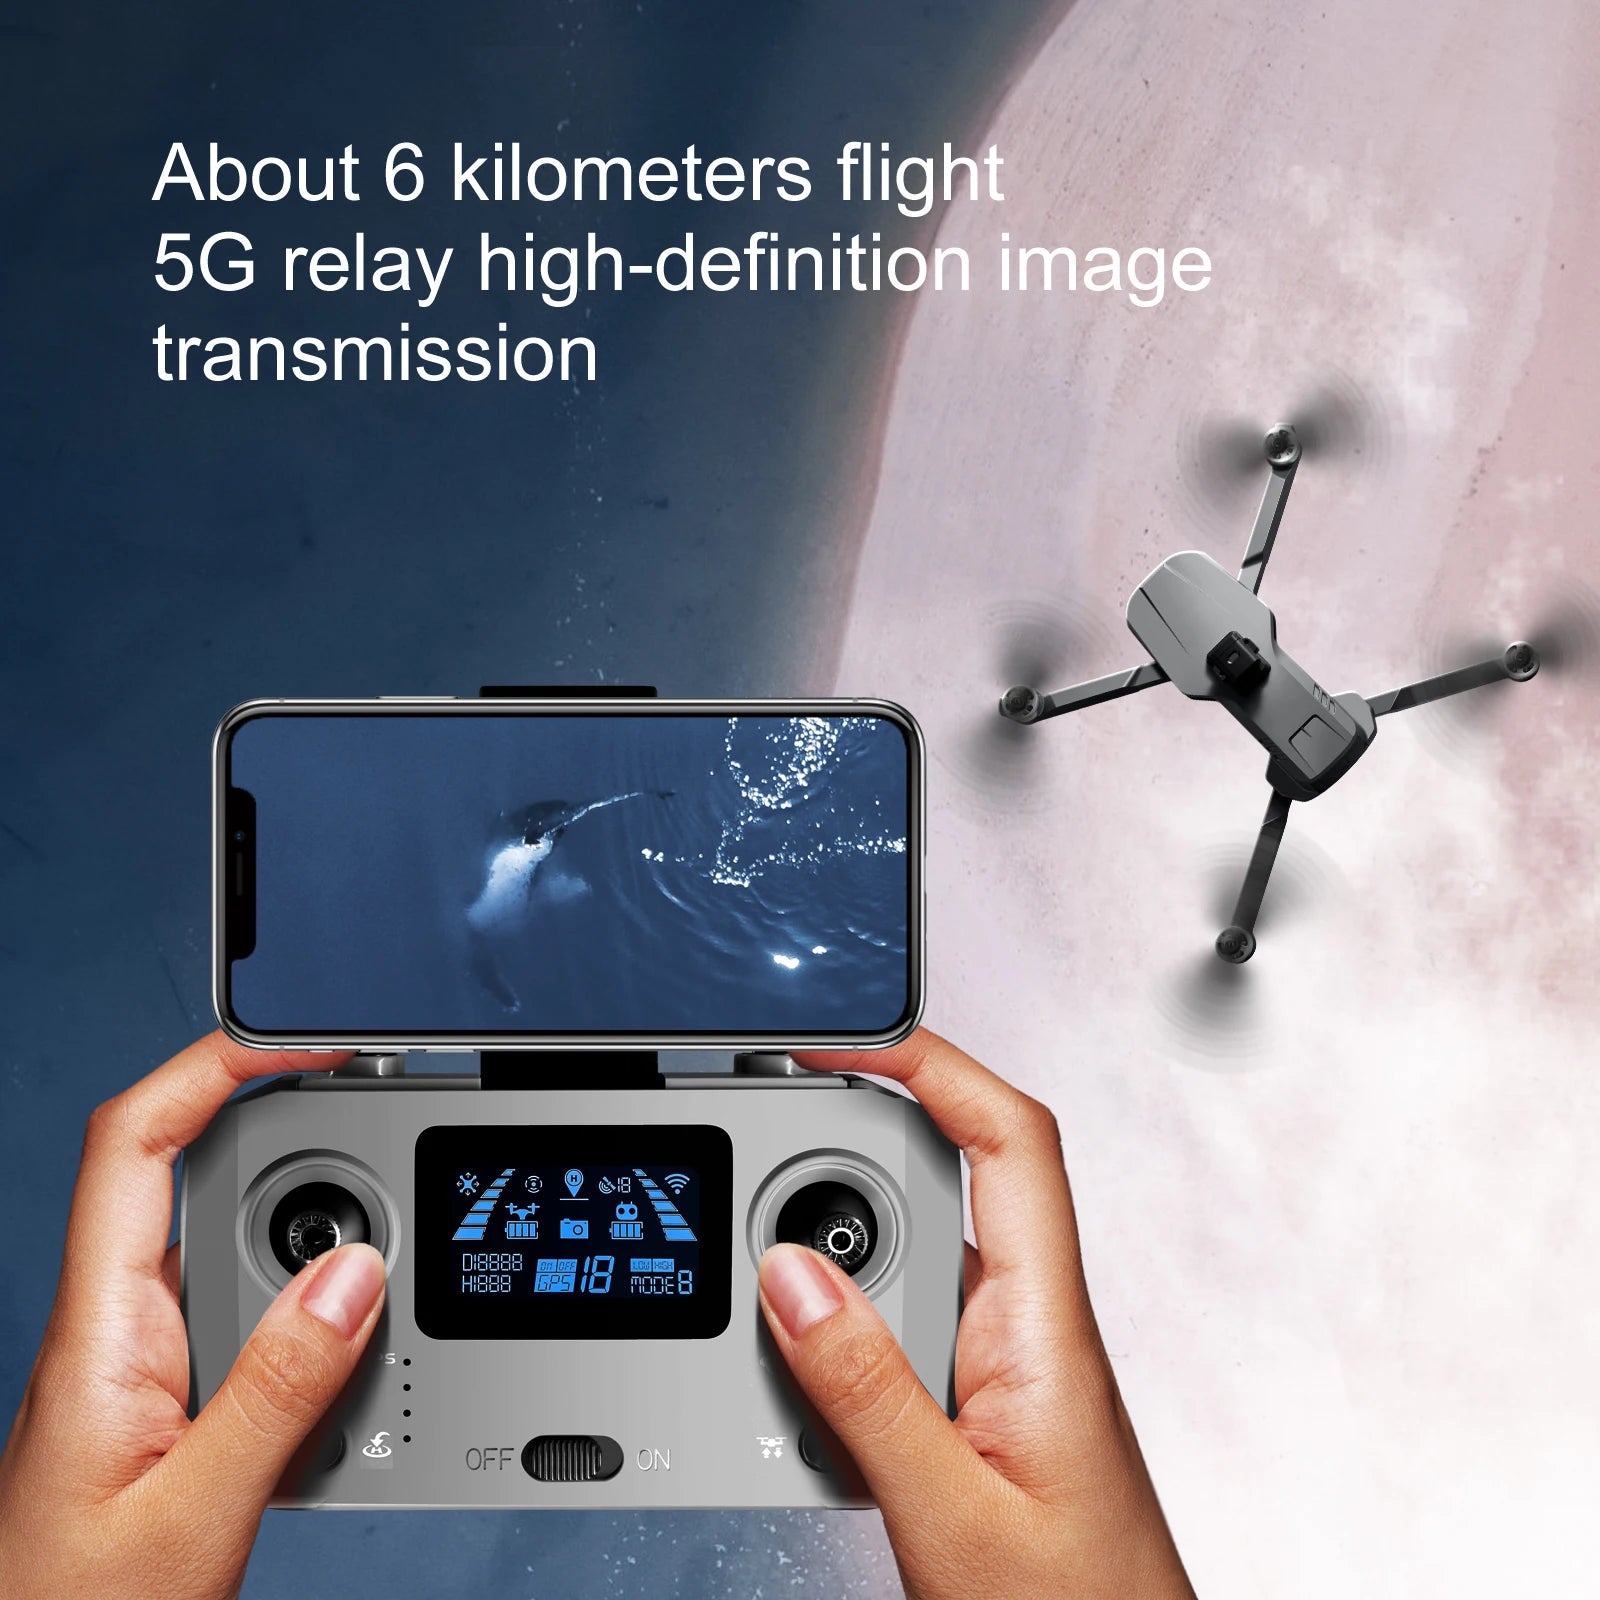 S155 Drone, 5G relay high-definition image transmission 0i8888 Baa Lul